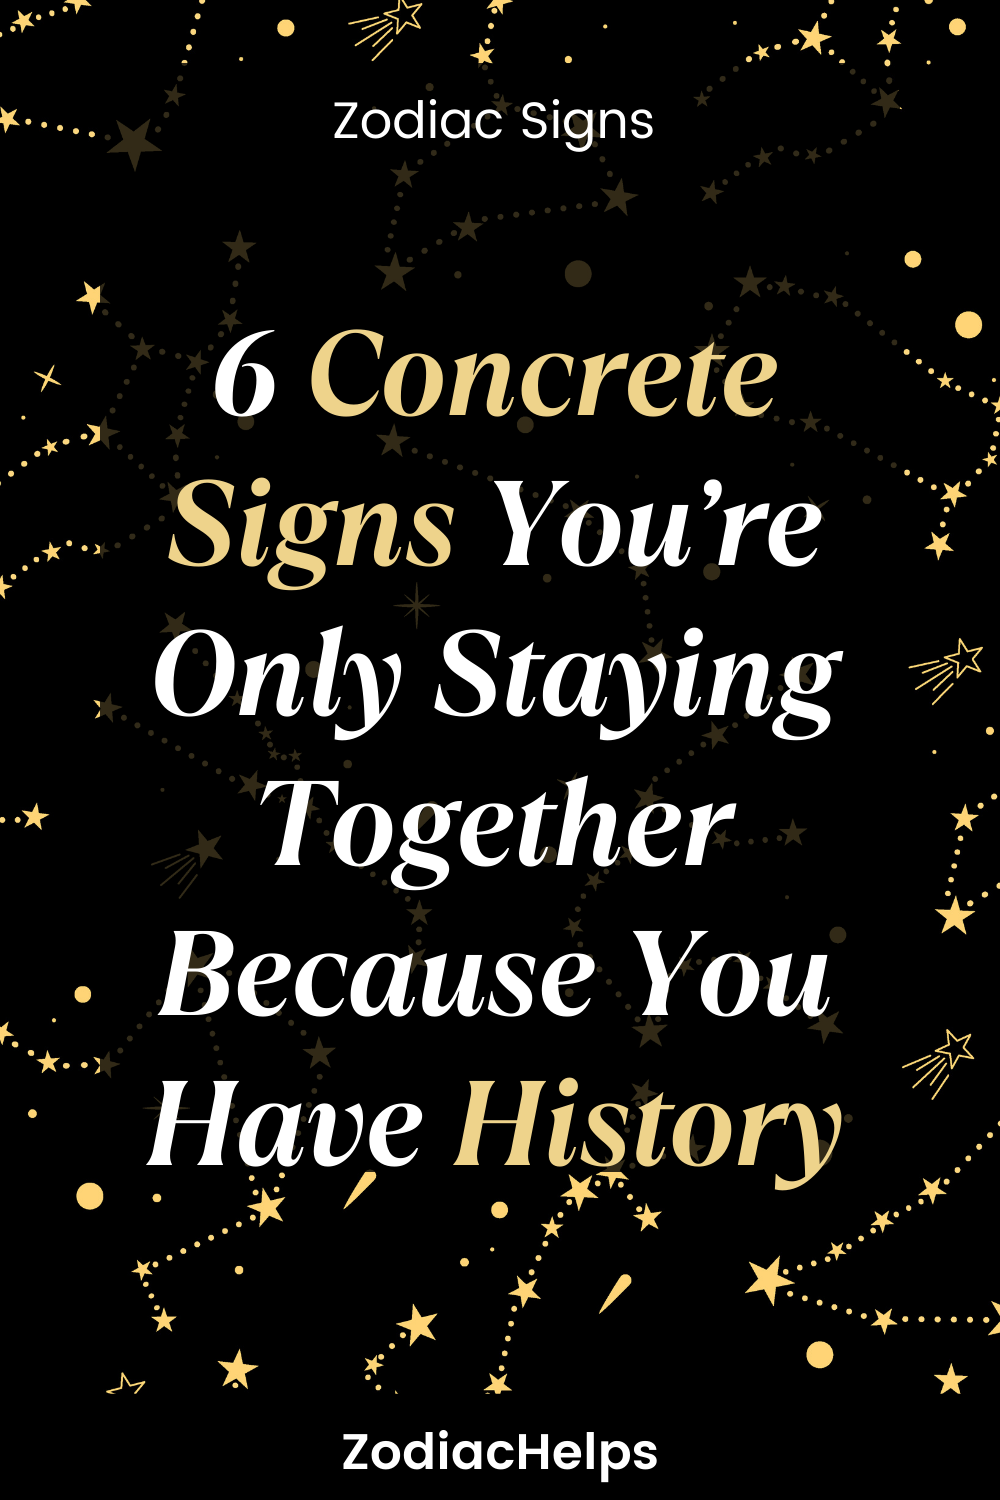 6 Concrete Signs You’re Only Staying Together Because You Have History